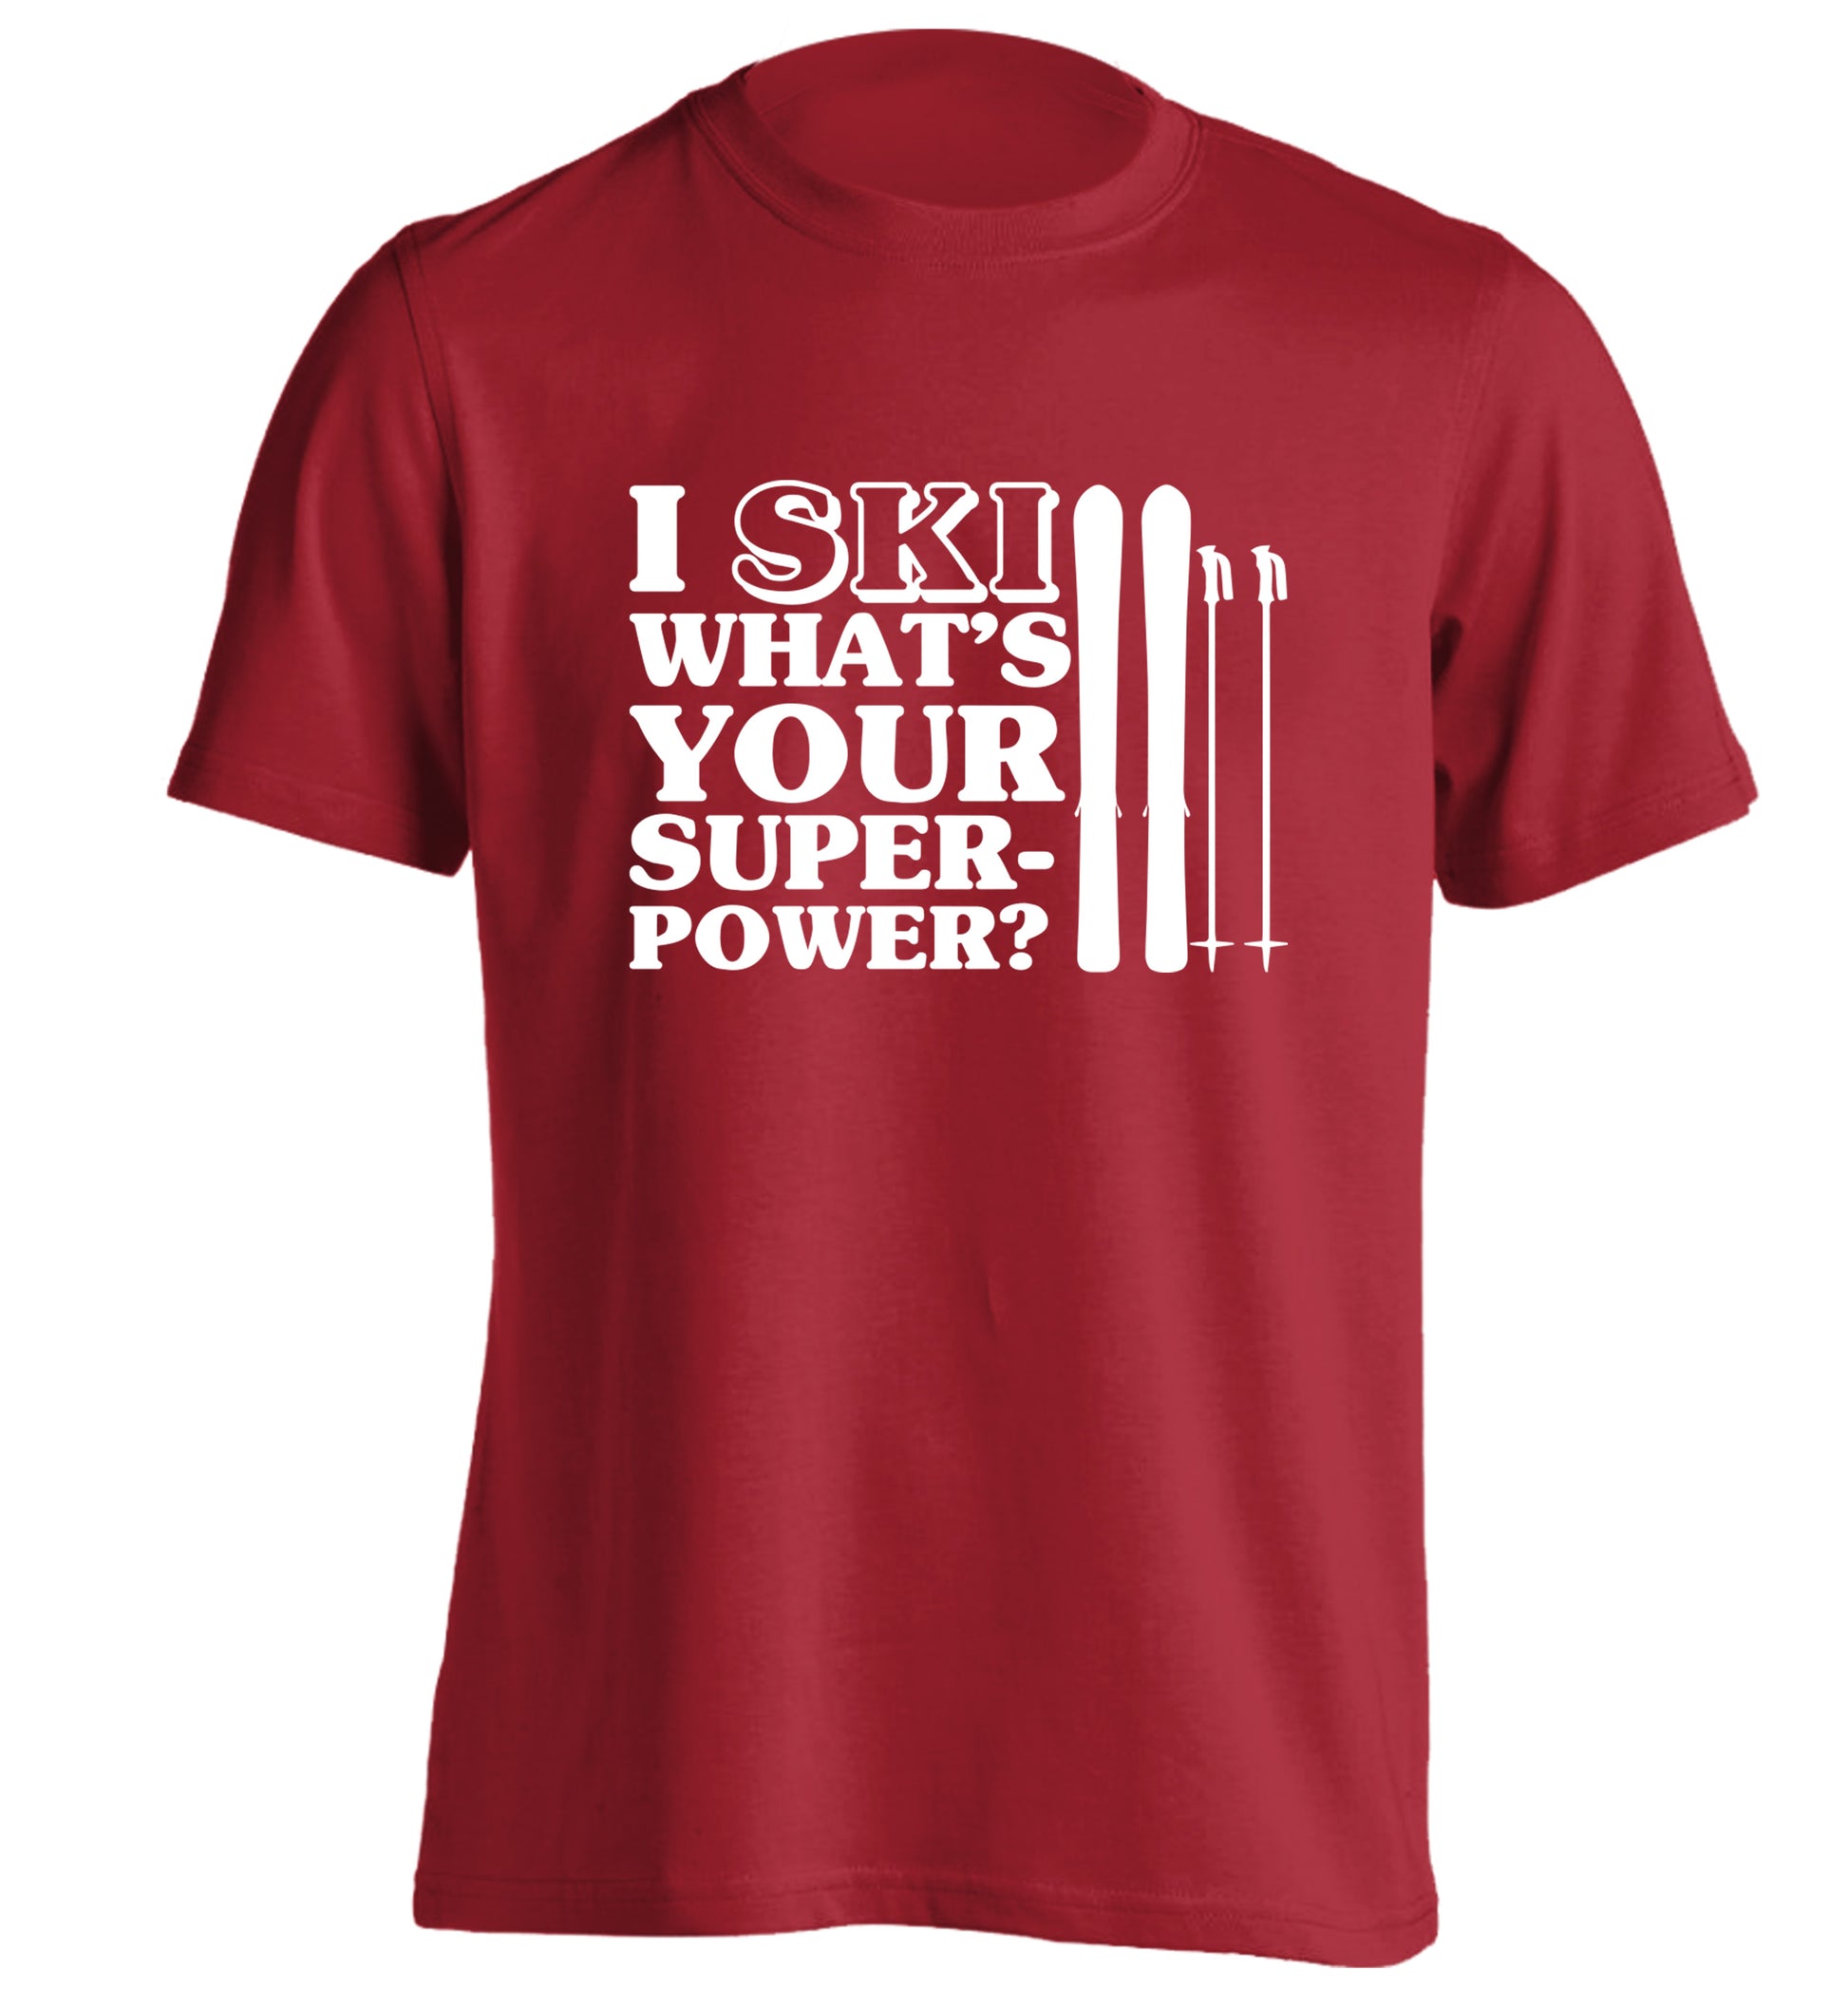 I ski what's your superpower? adults unisexred Tshirt 2XL